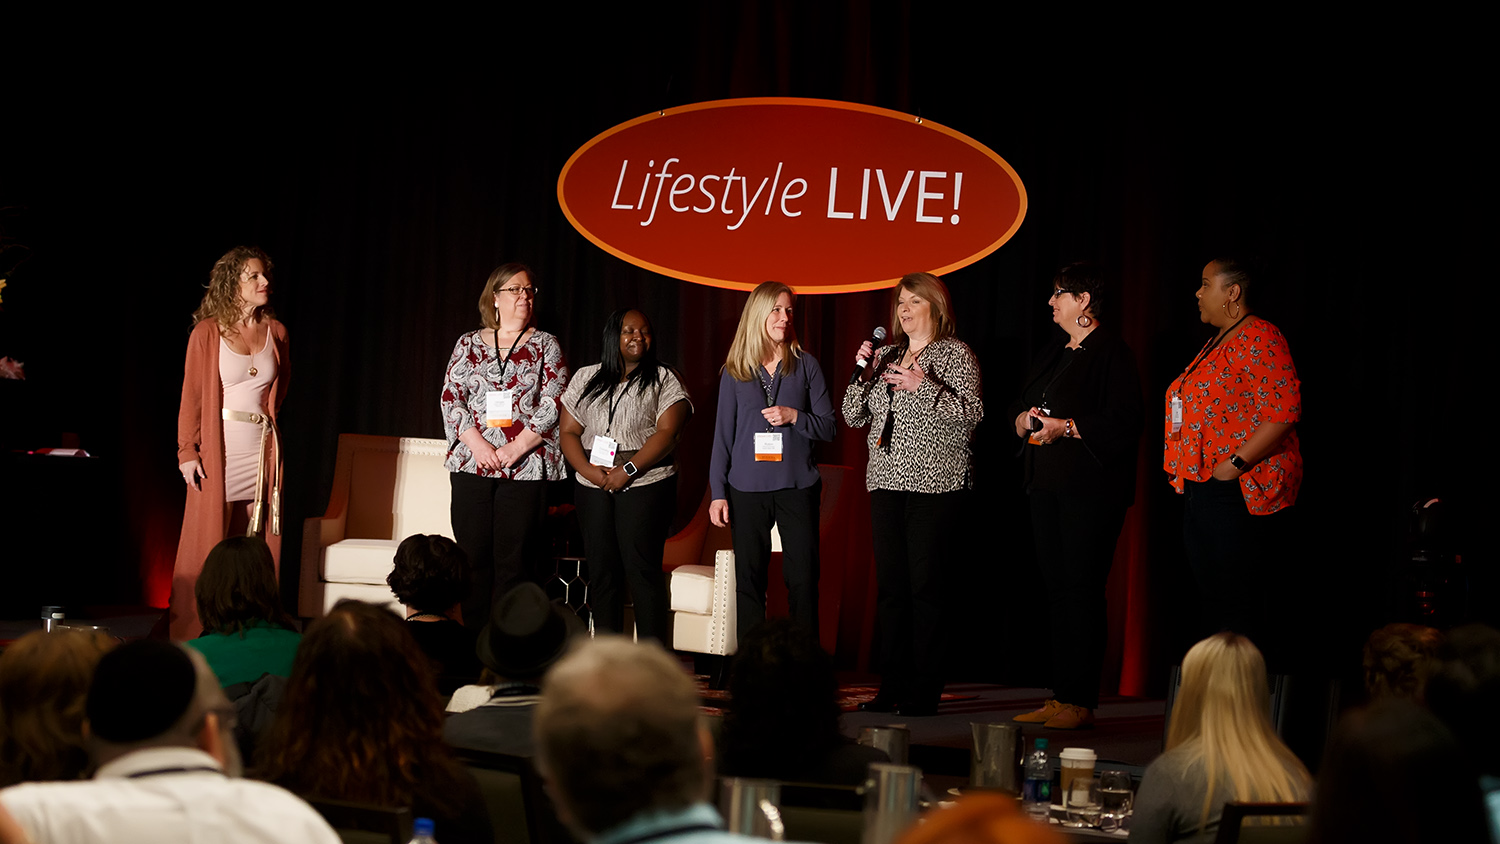 The Top 10 Things I Learned from Doing a Live Event